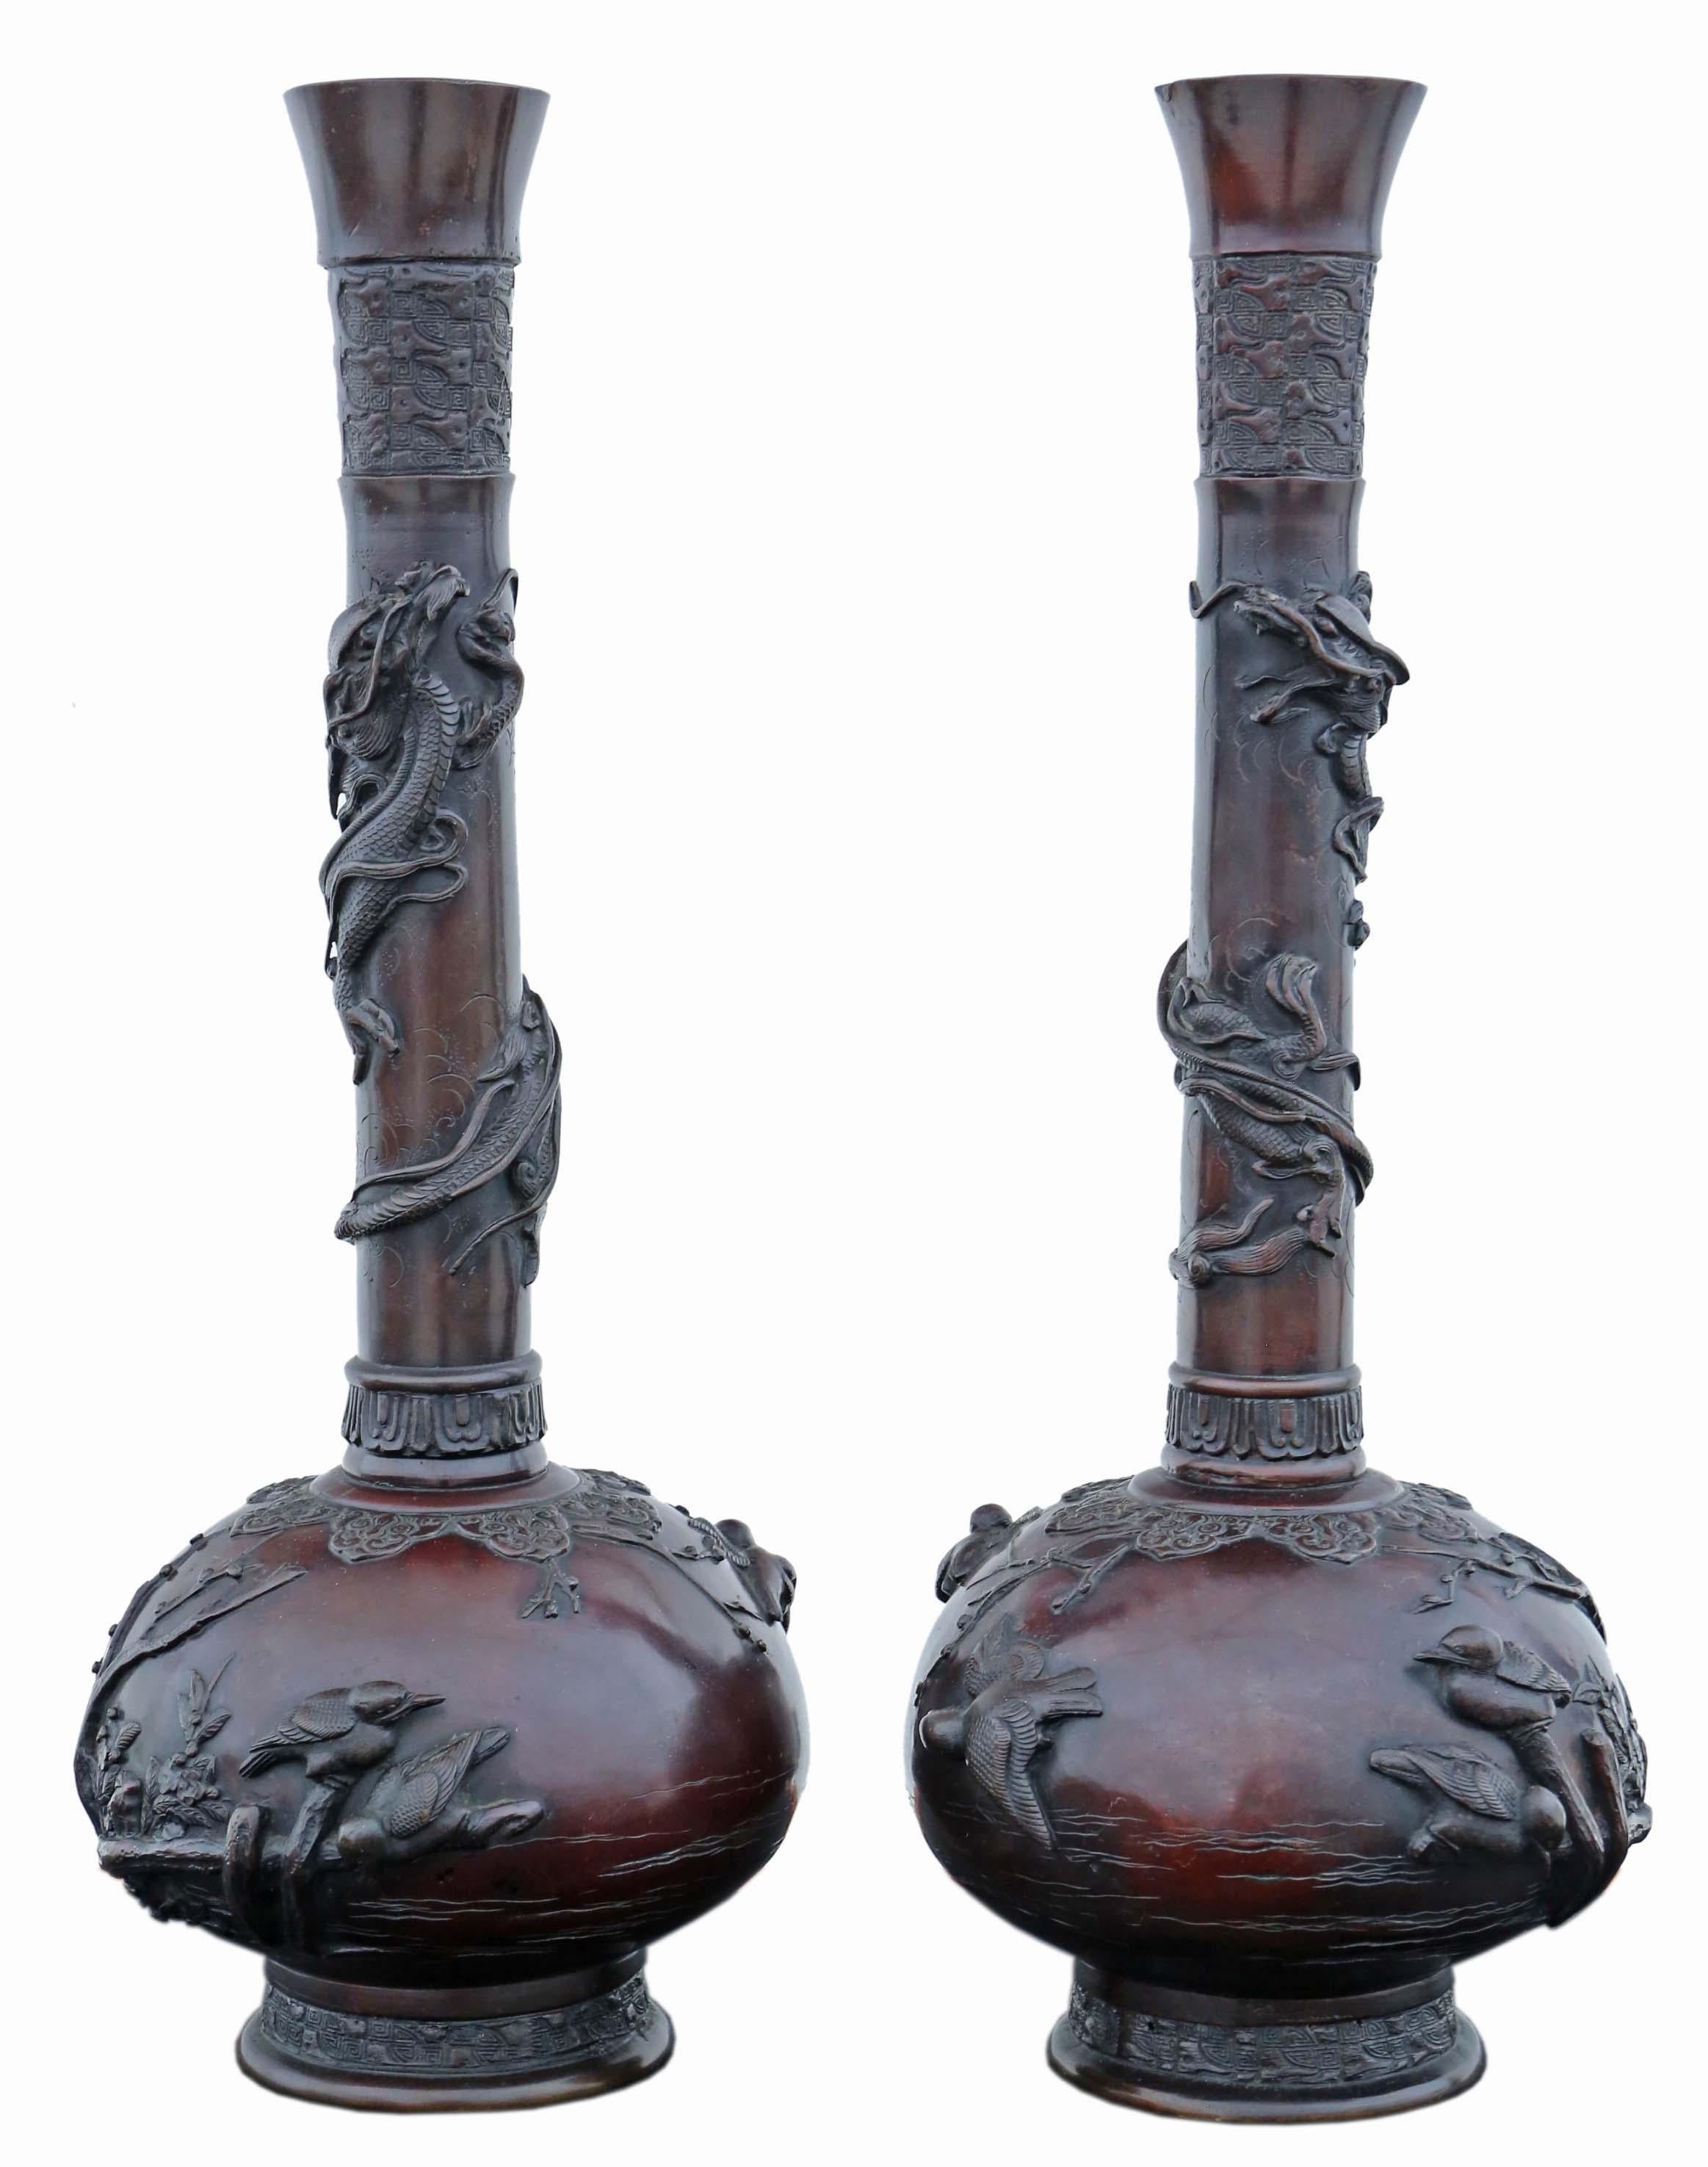 Antique Very Large Pair of Japanese Bronze Vases - Exquisite Meiji Period Artist Pieces!

These remarkable Japanese bronze vases, dating back to the 19th Century Meiji Period, exemplify the finest craftsmanship and artistry. Each vase is an artist's